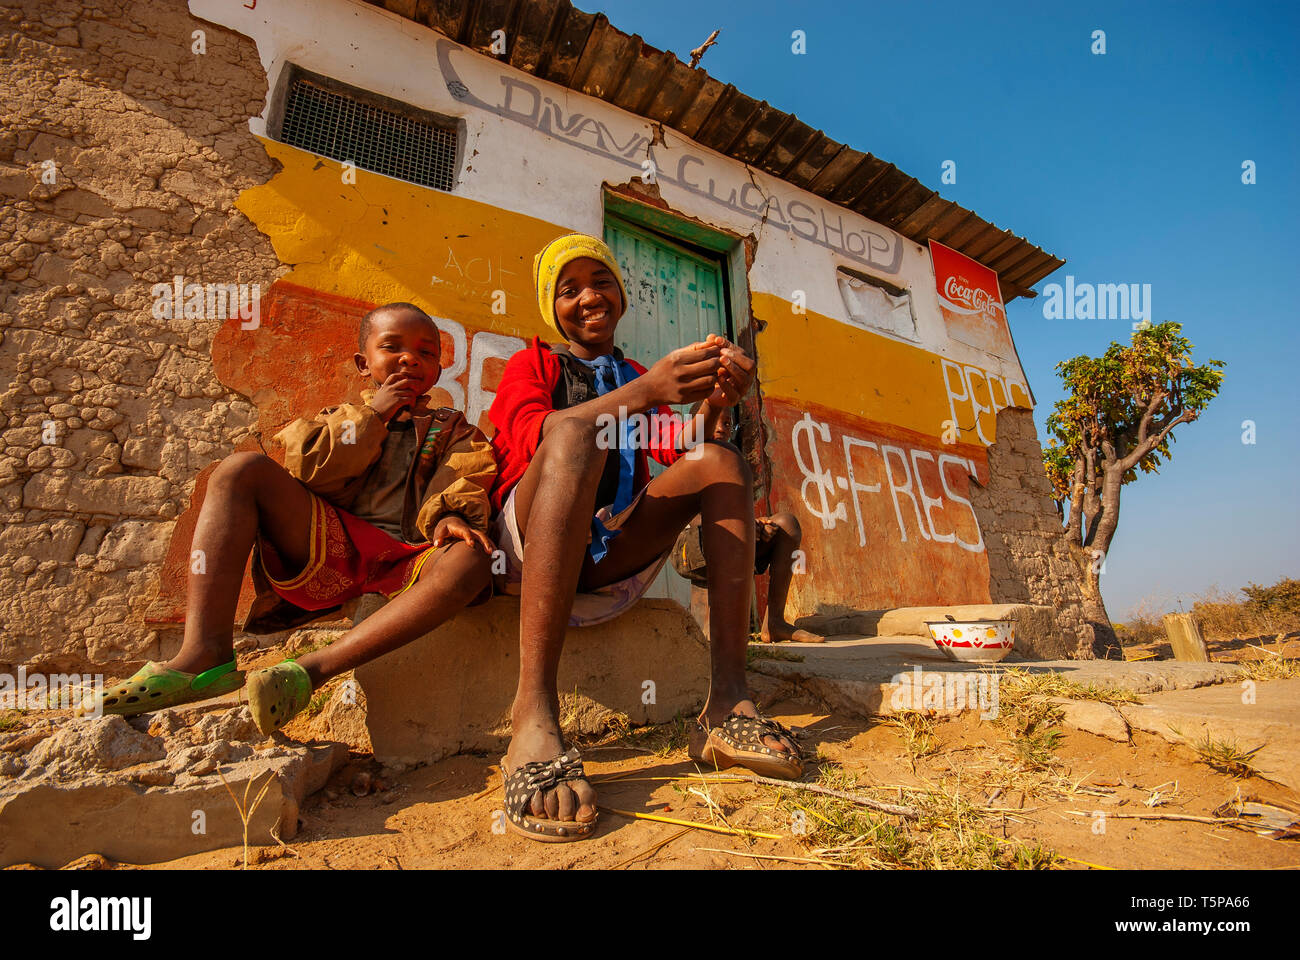 Young africans in front of an descrepit shop just by te road, Caprivi Strip, Namibia Stock Photo